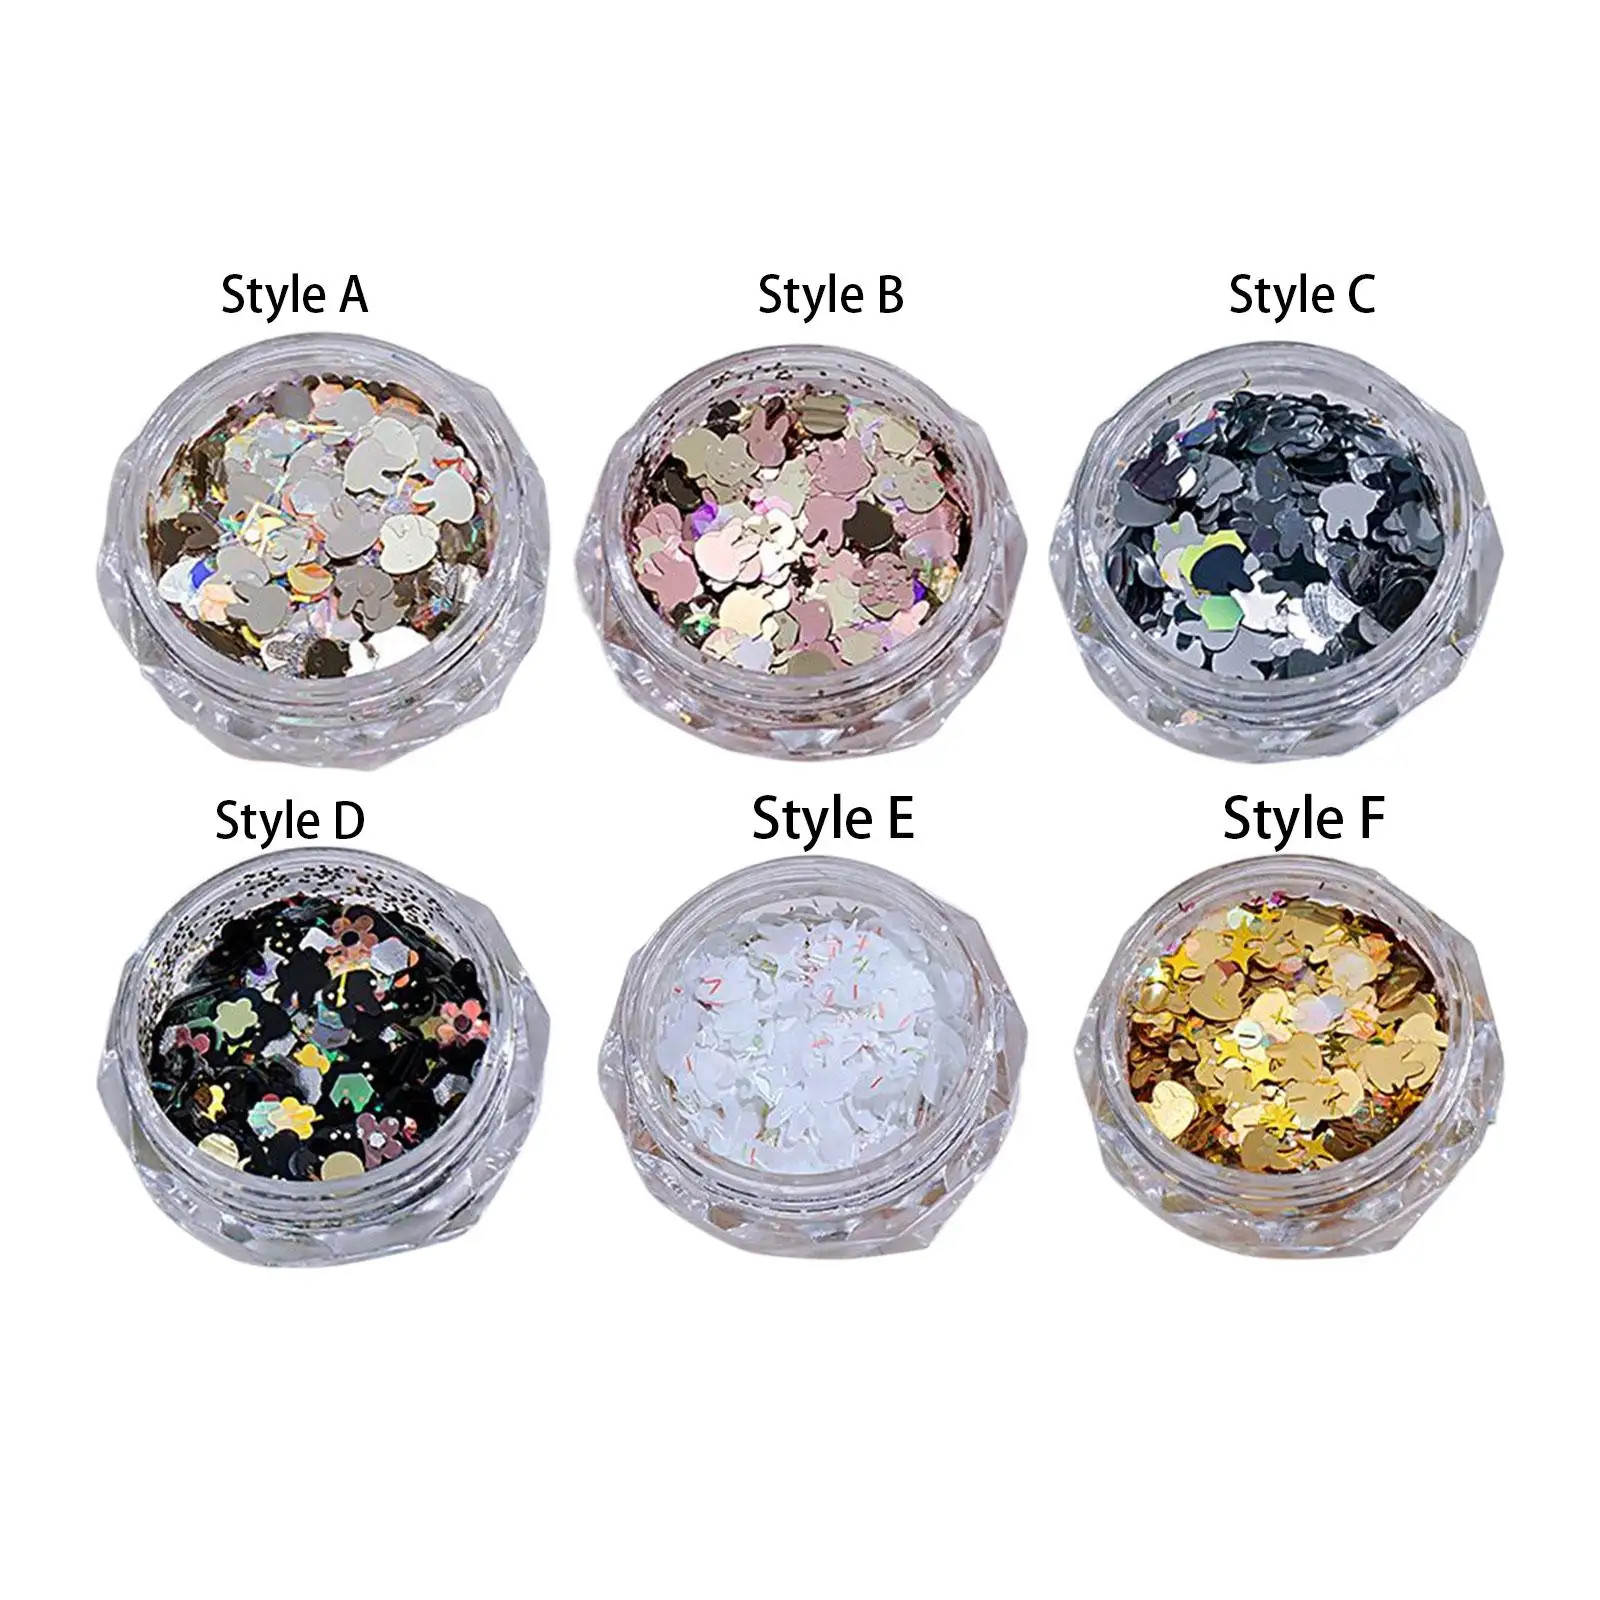 Shining Nail Glitter Sequins Nail Art Women Girls Bright Flakes for Holiday Makeup Craftwork Party Fashion Show Phone Cases